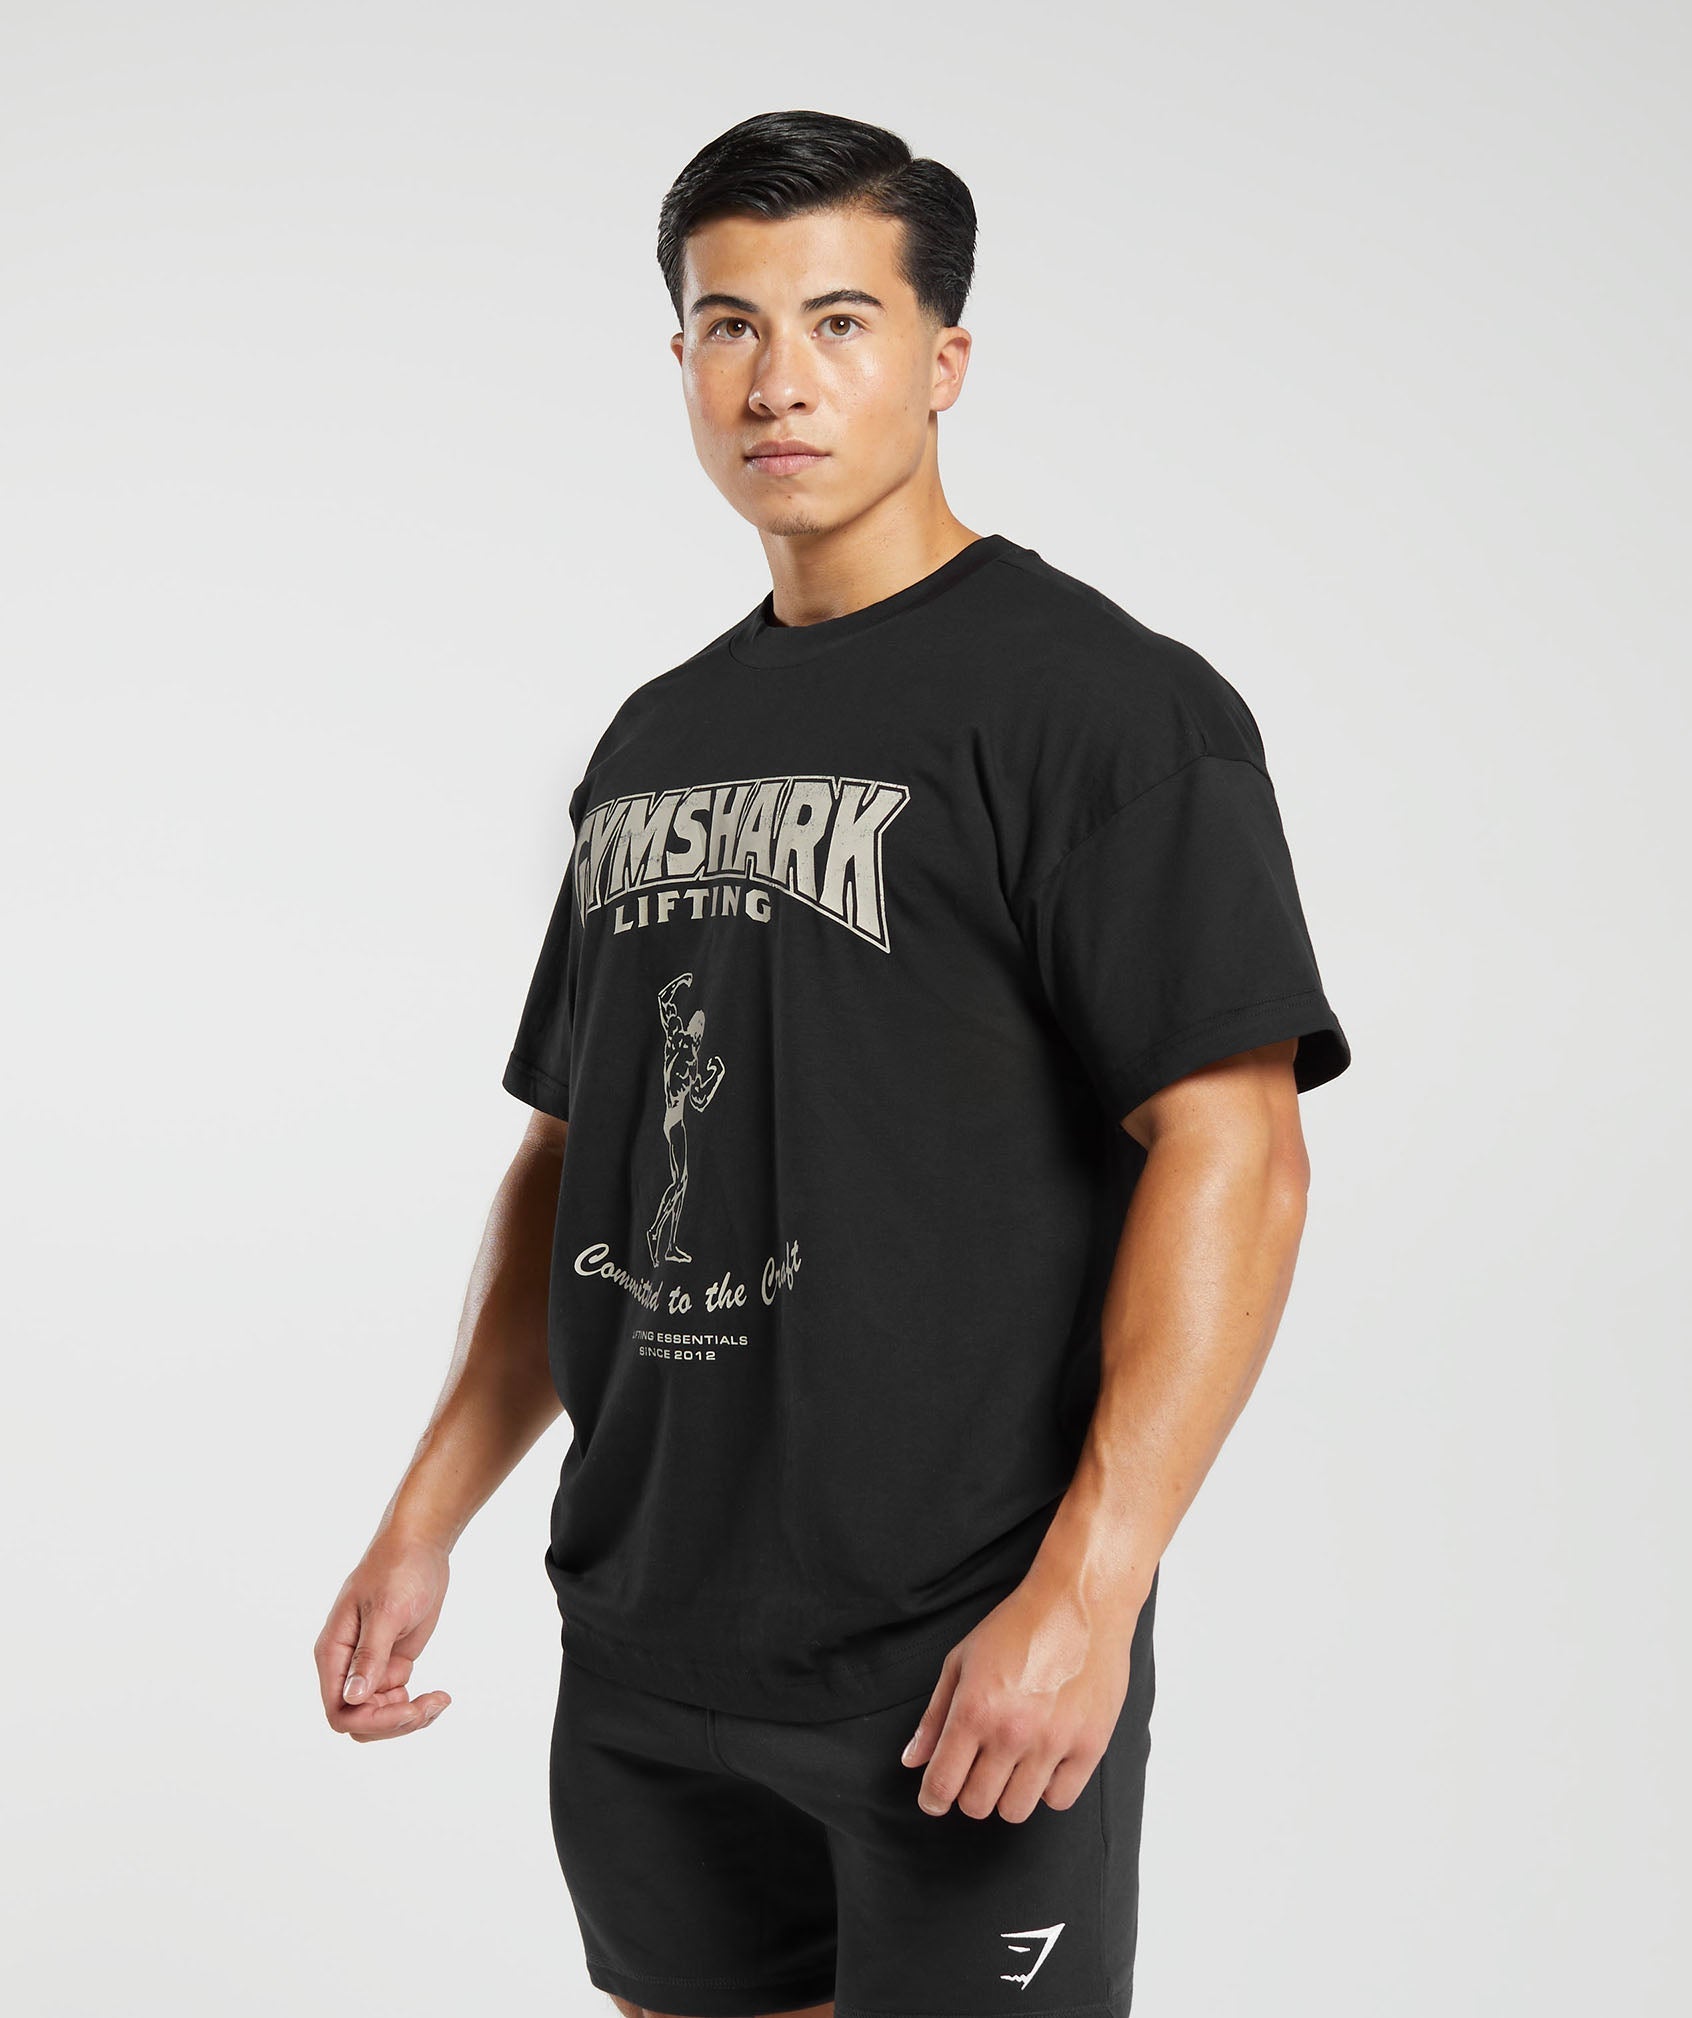 Committed to the Craft T-Shirt in Black - view 3